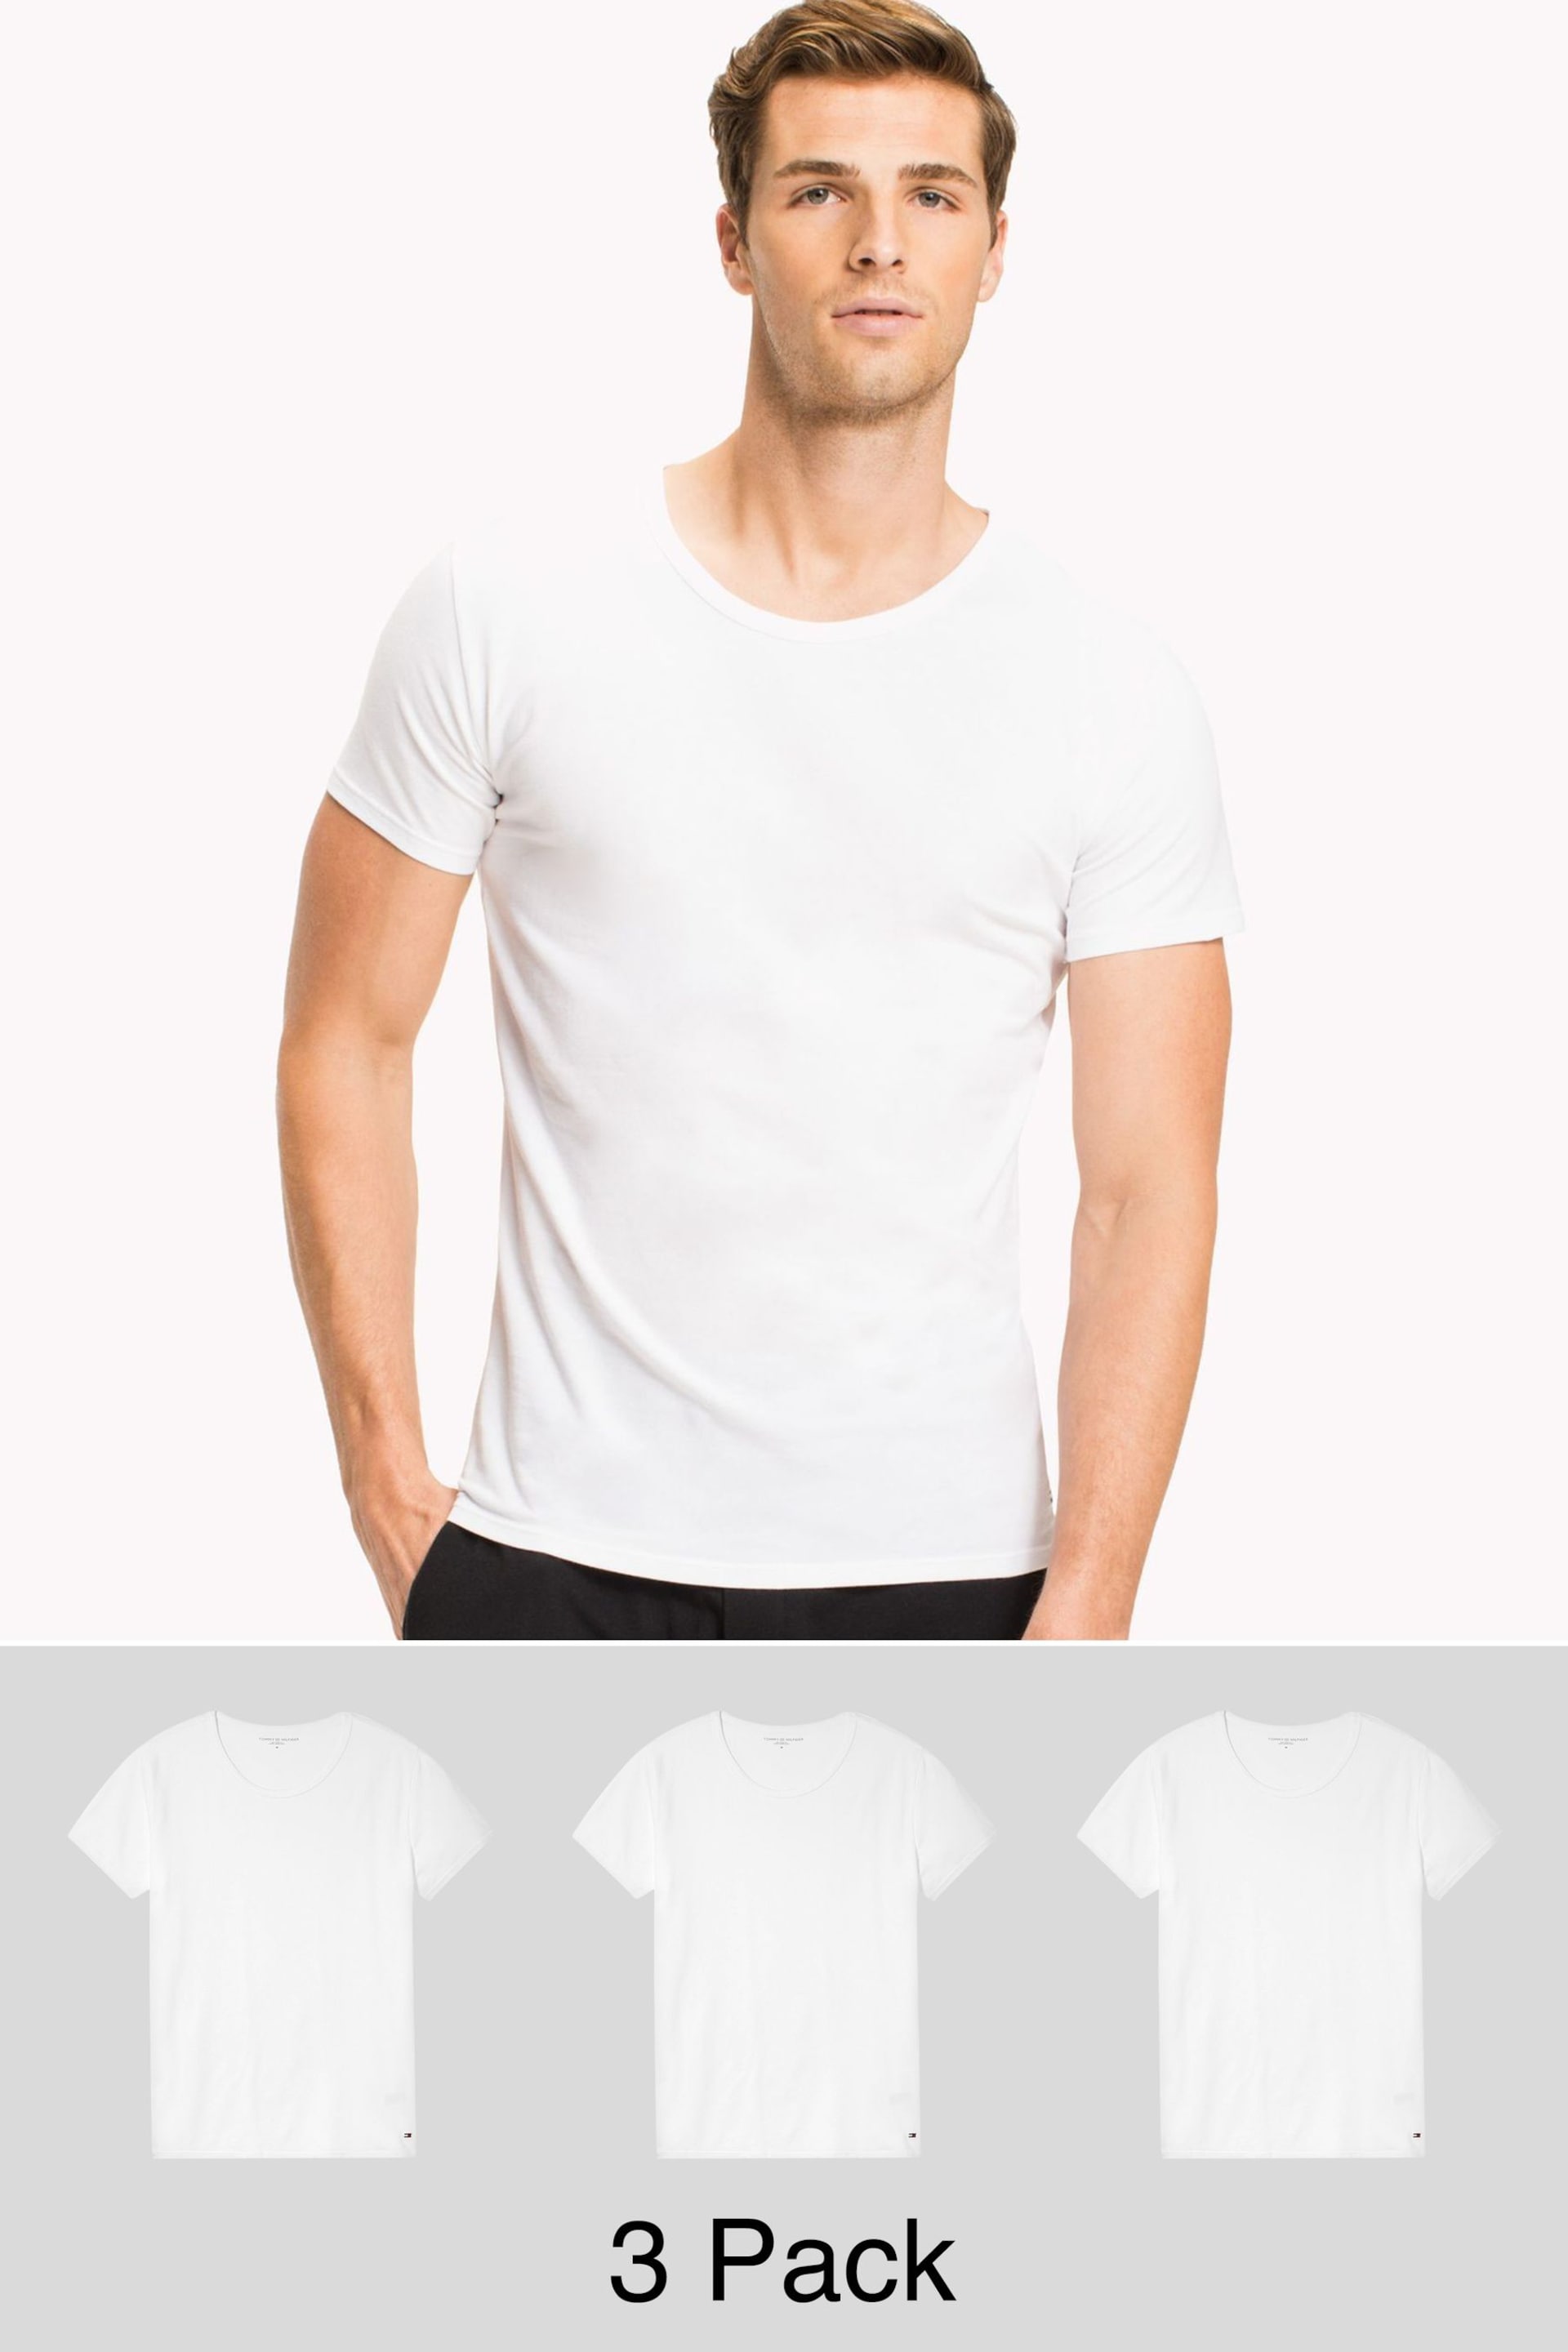 Tommy Hilfiger Premium Lounge T-Shirts 3 Pack - Image 1 of 6